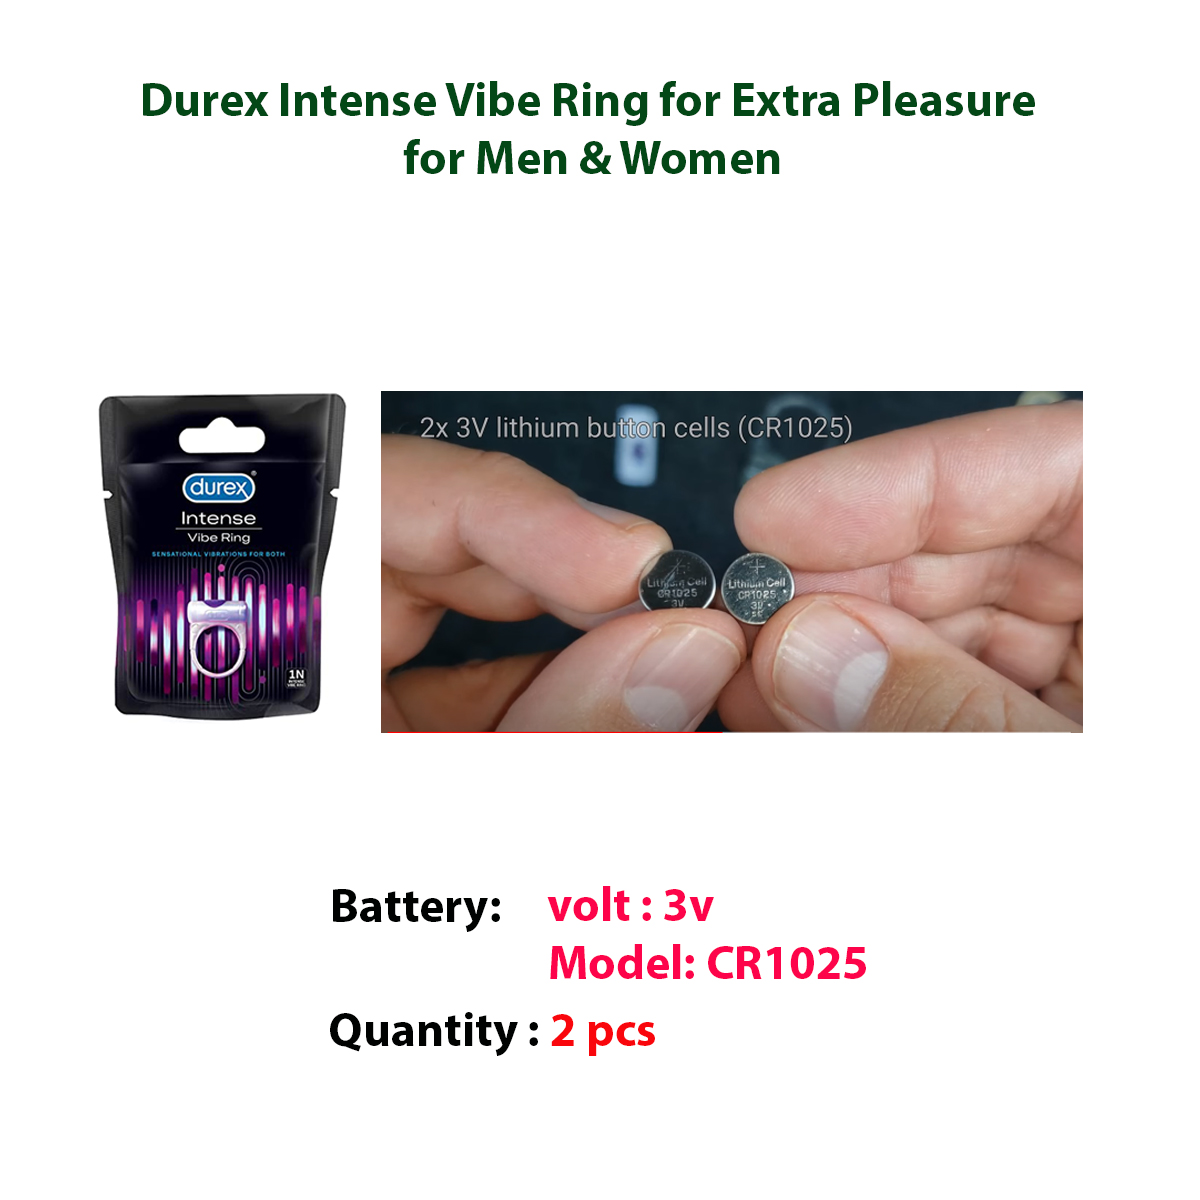 Durex Intense Vibration Ring / How To Replace batteries And Use - YouTube